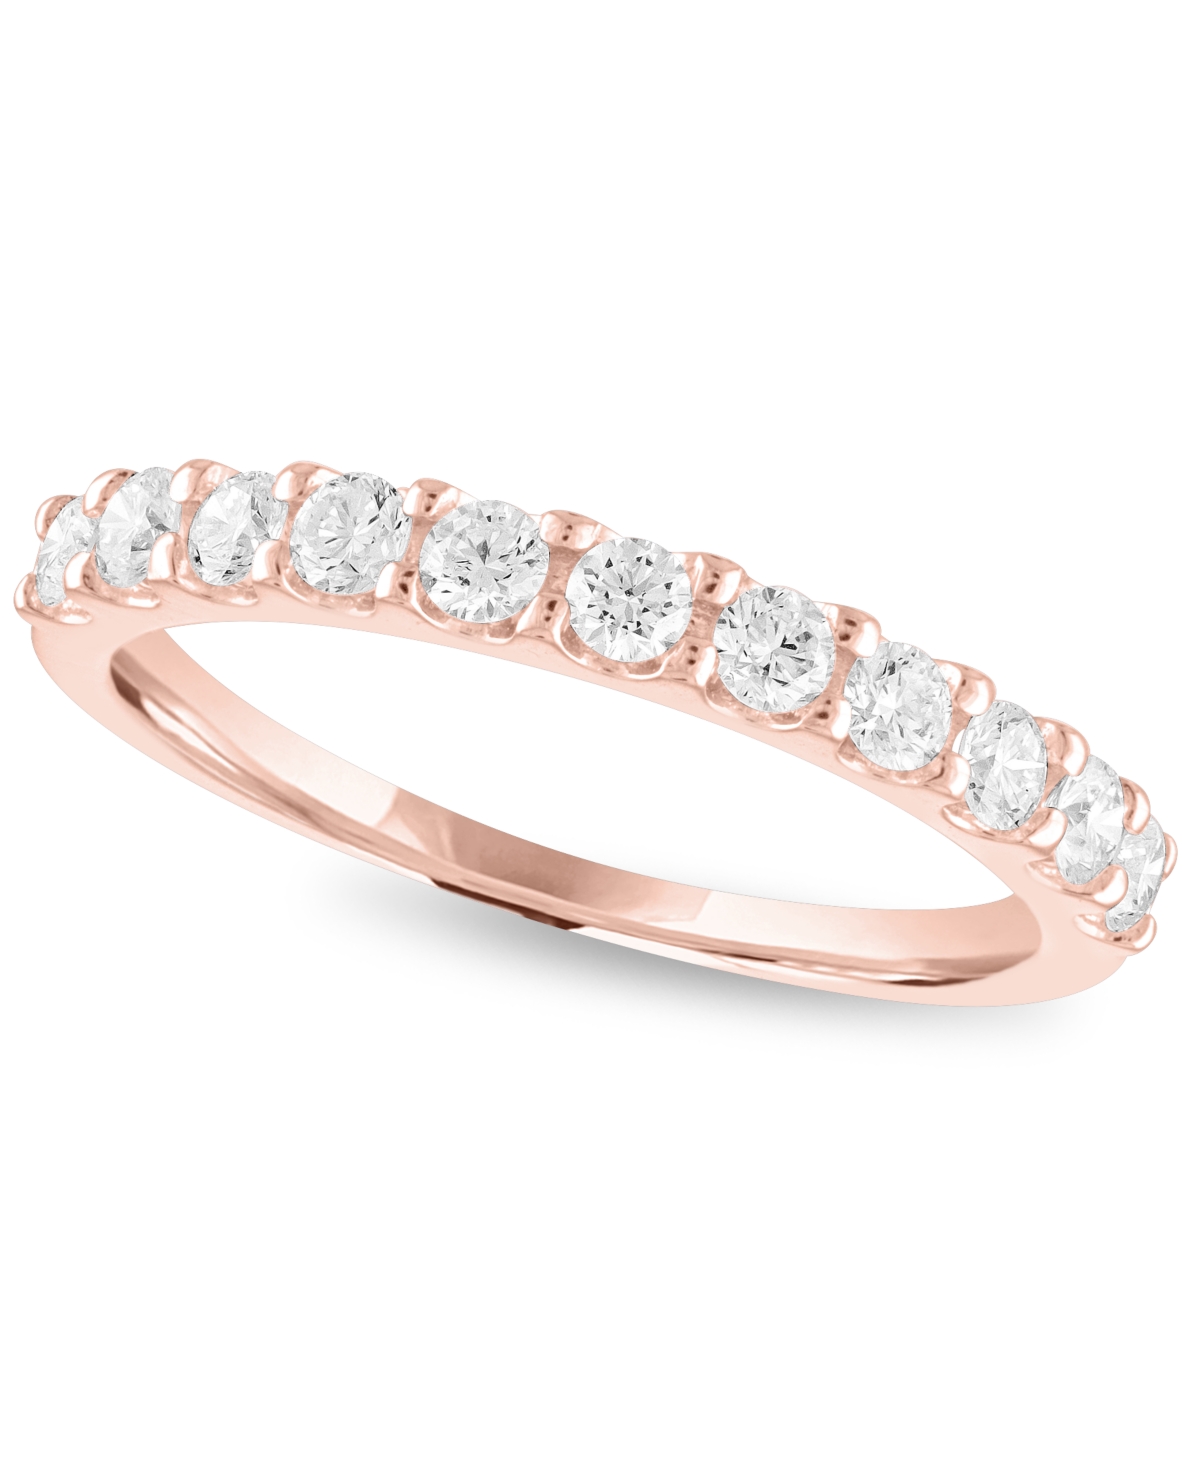 Forever Grown Diamonds Lab-Grown Diamond Anniversary Ring (1/2 ct. t.w.) in Sterling Silver, 14k Gold over Sterling Silver or 14k Rose Gold over Sterling Silver